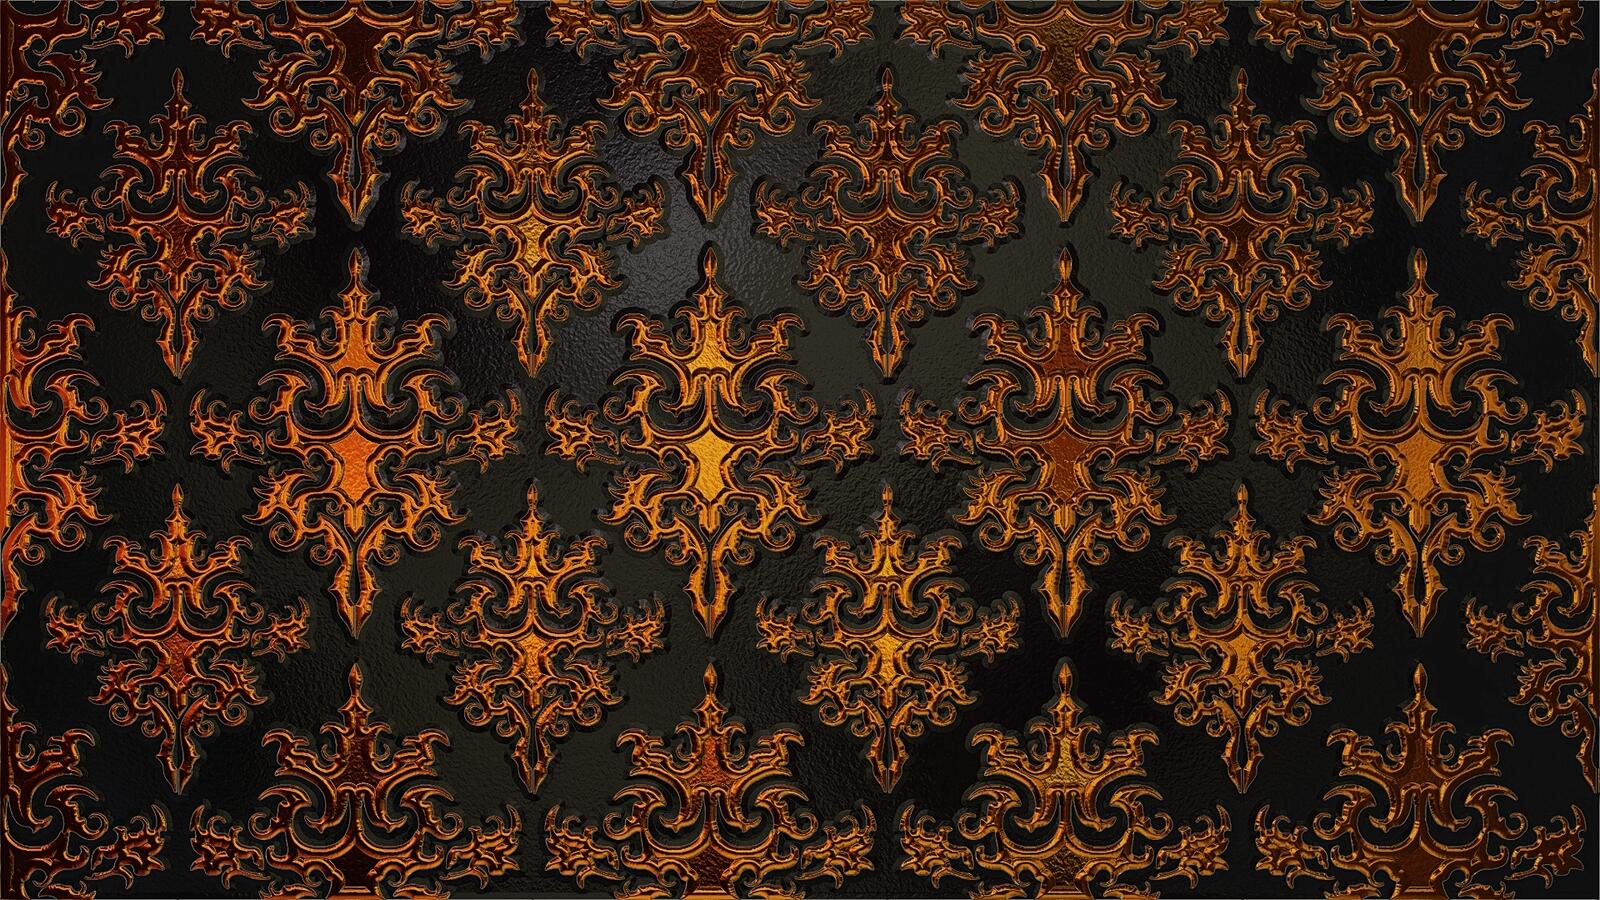 Wallpapers textures ornament black background on the desktop